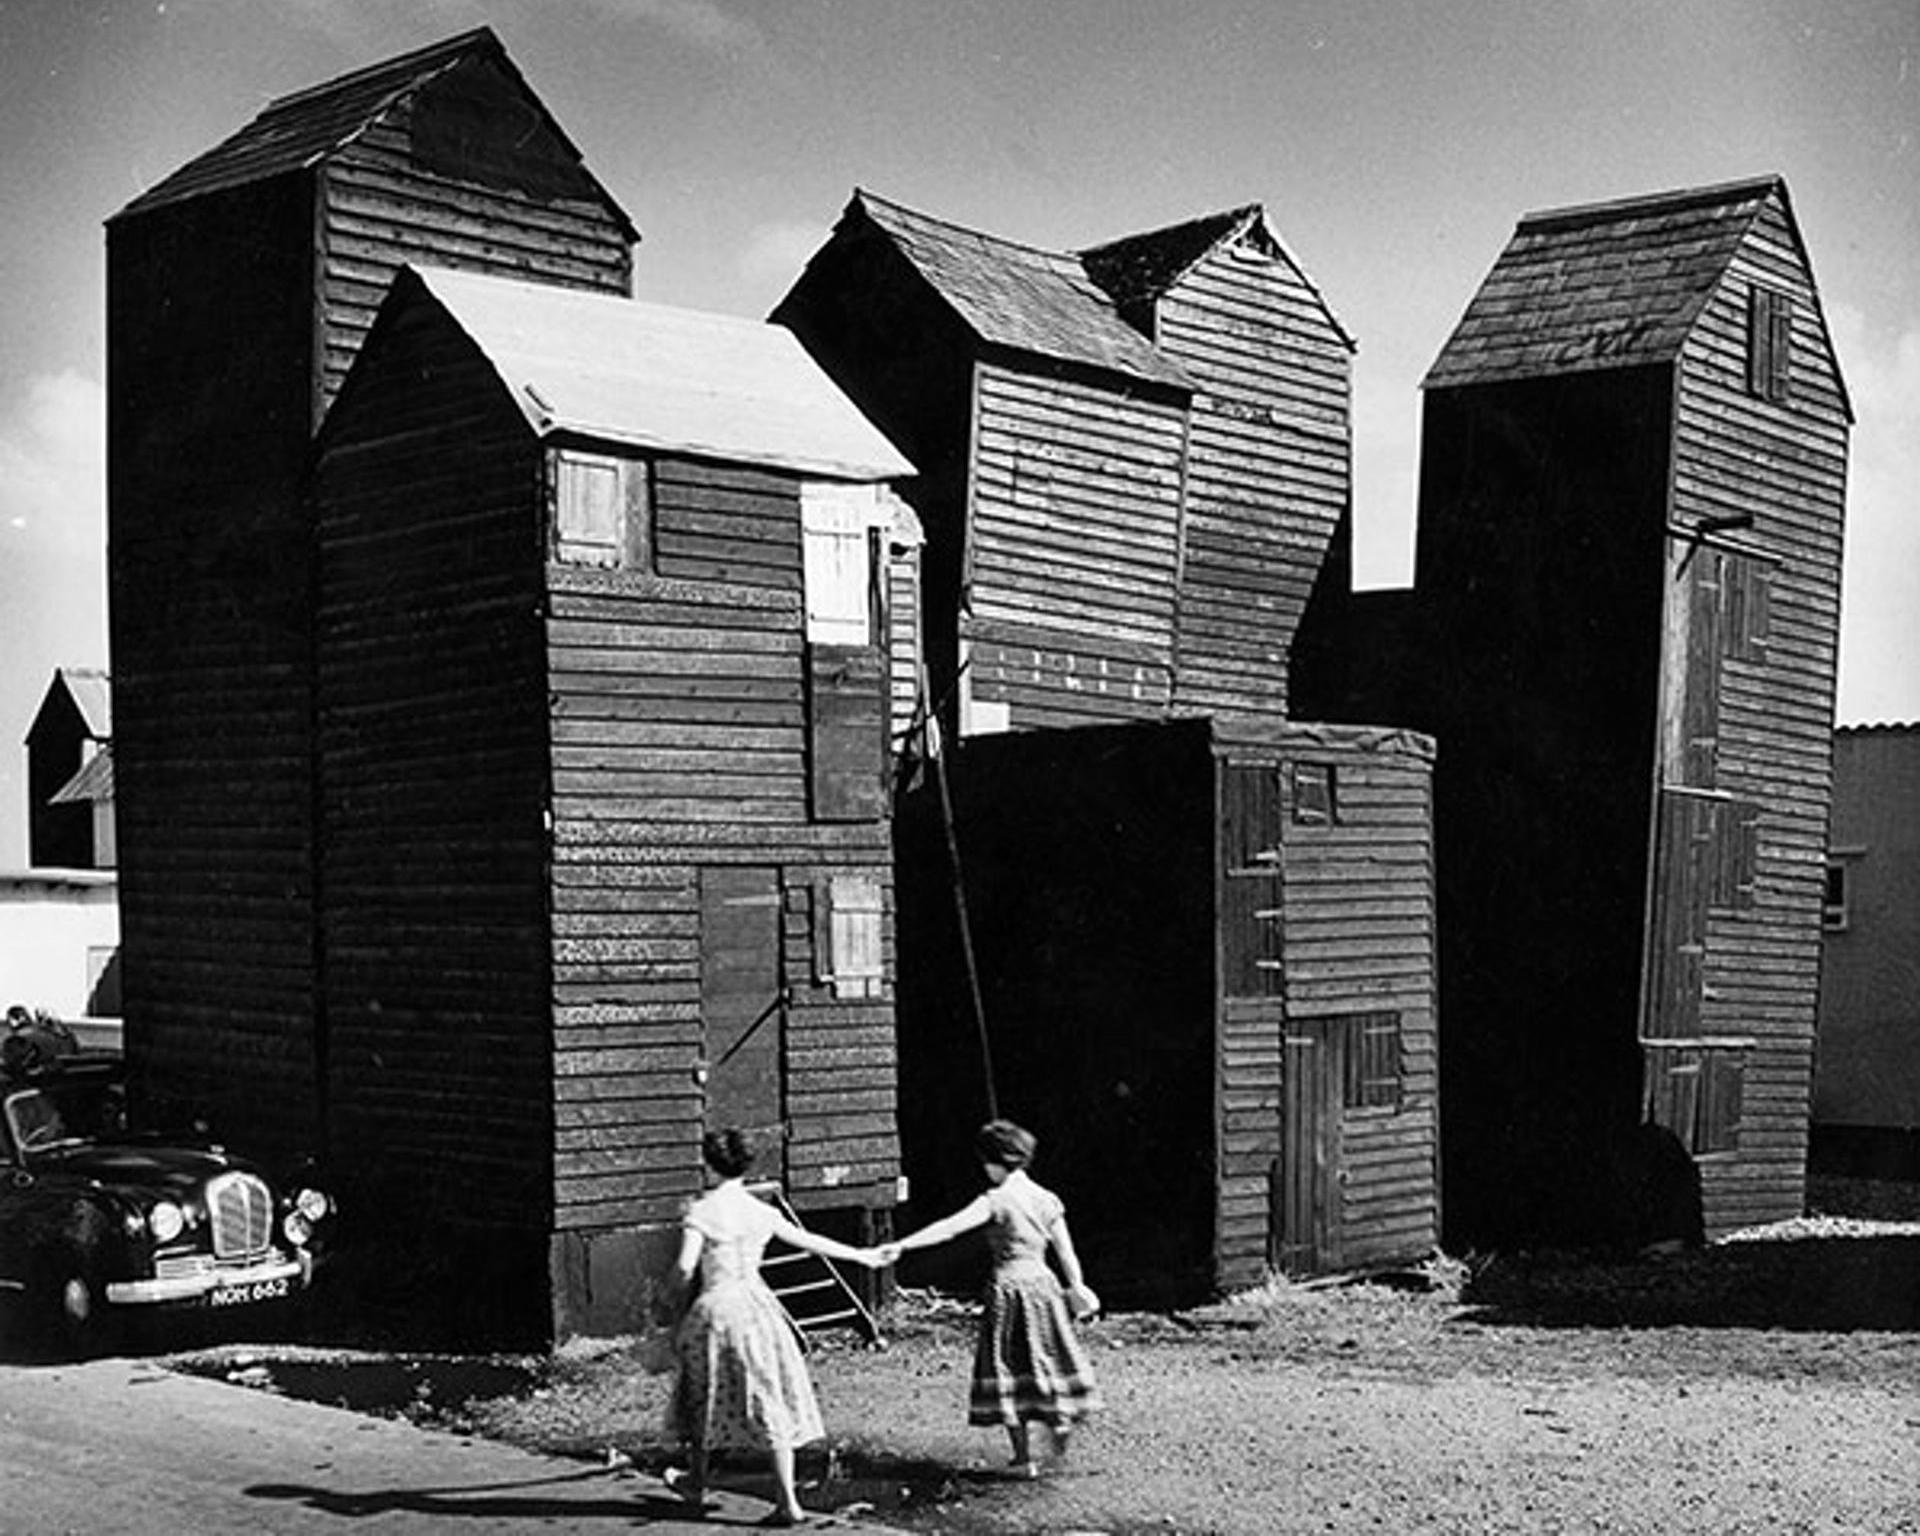 Eric de Mare: Fishermen's huts, Hastings (1956) © Architectural Press Archive / RIBA Library Photographs Collection